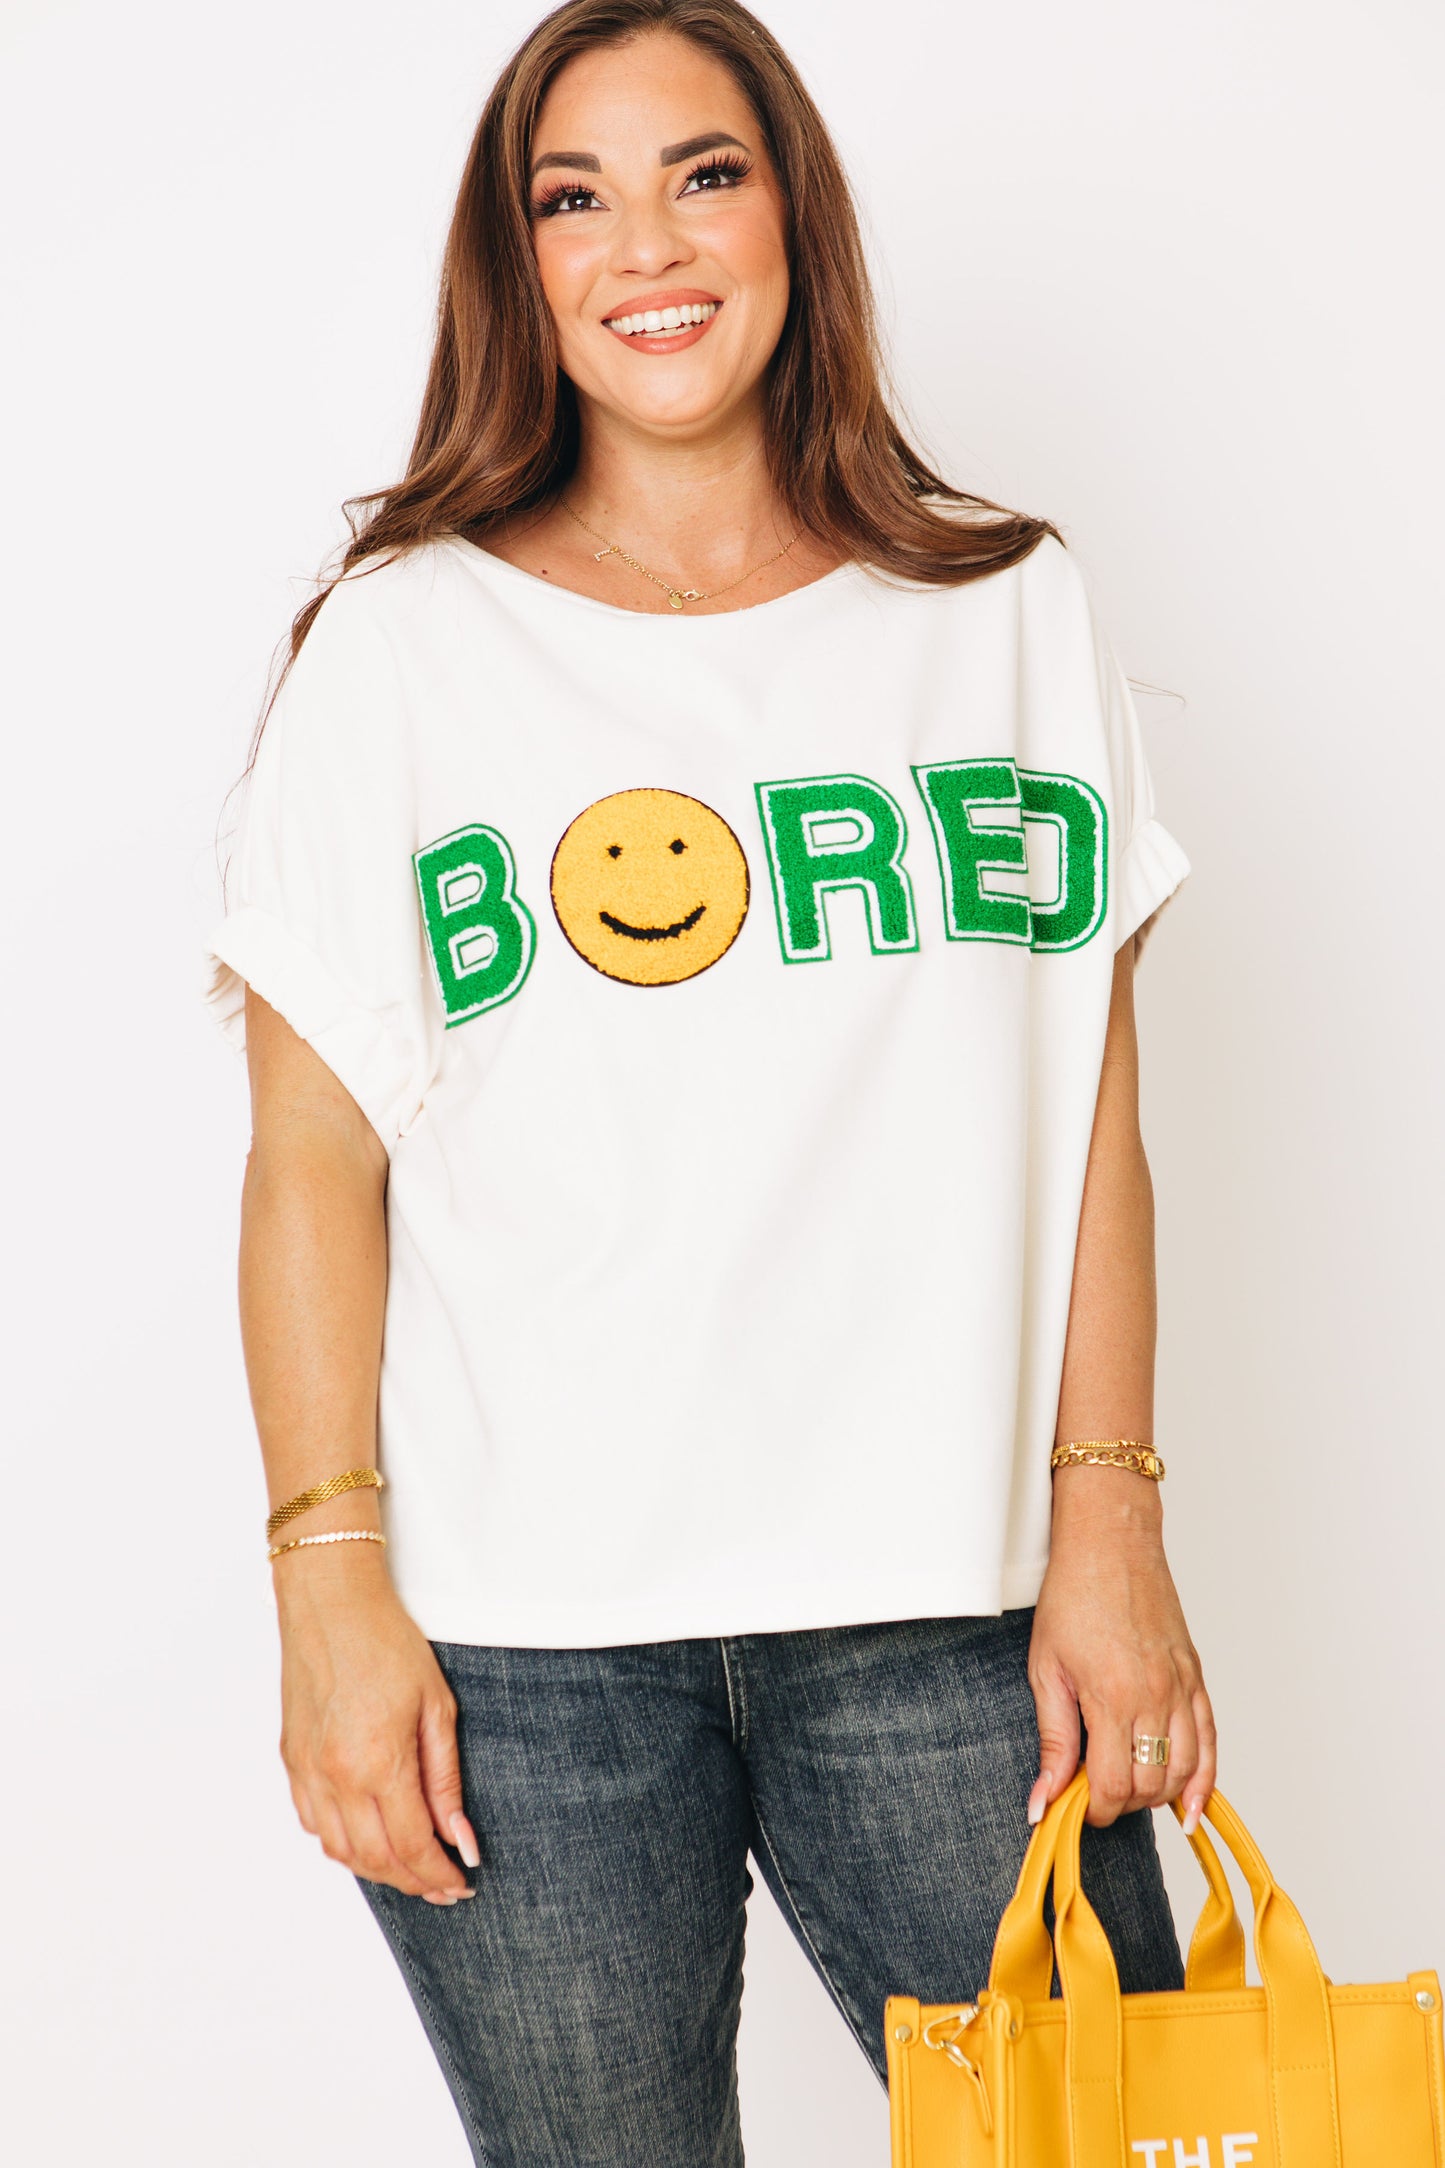 Bored Graphic Top (S-3XL)